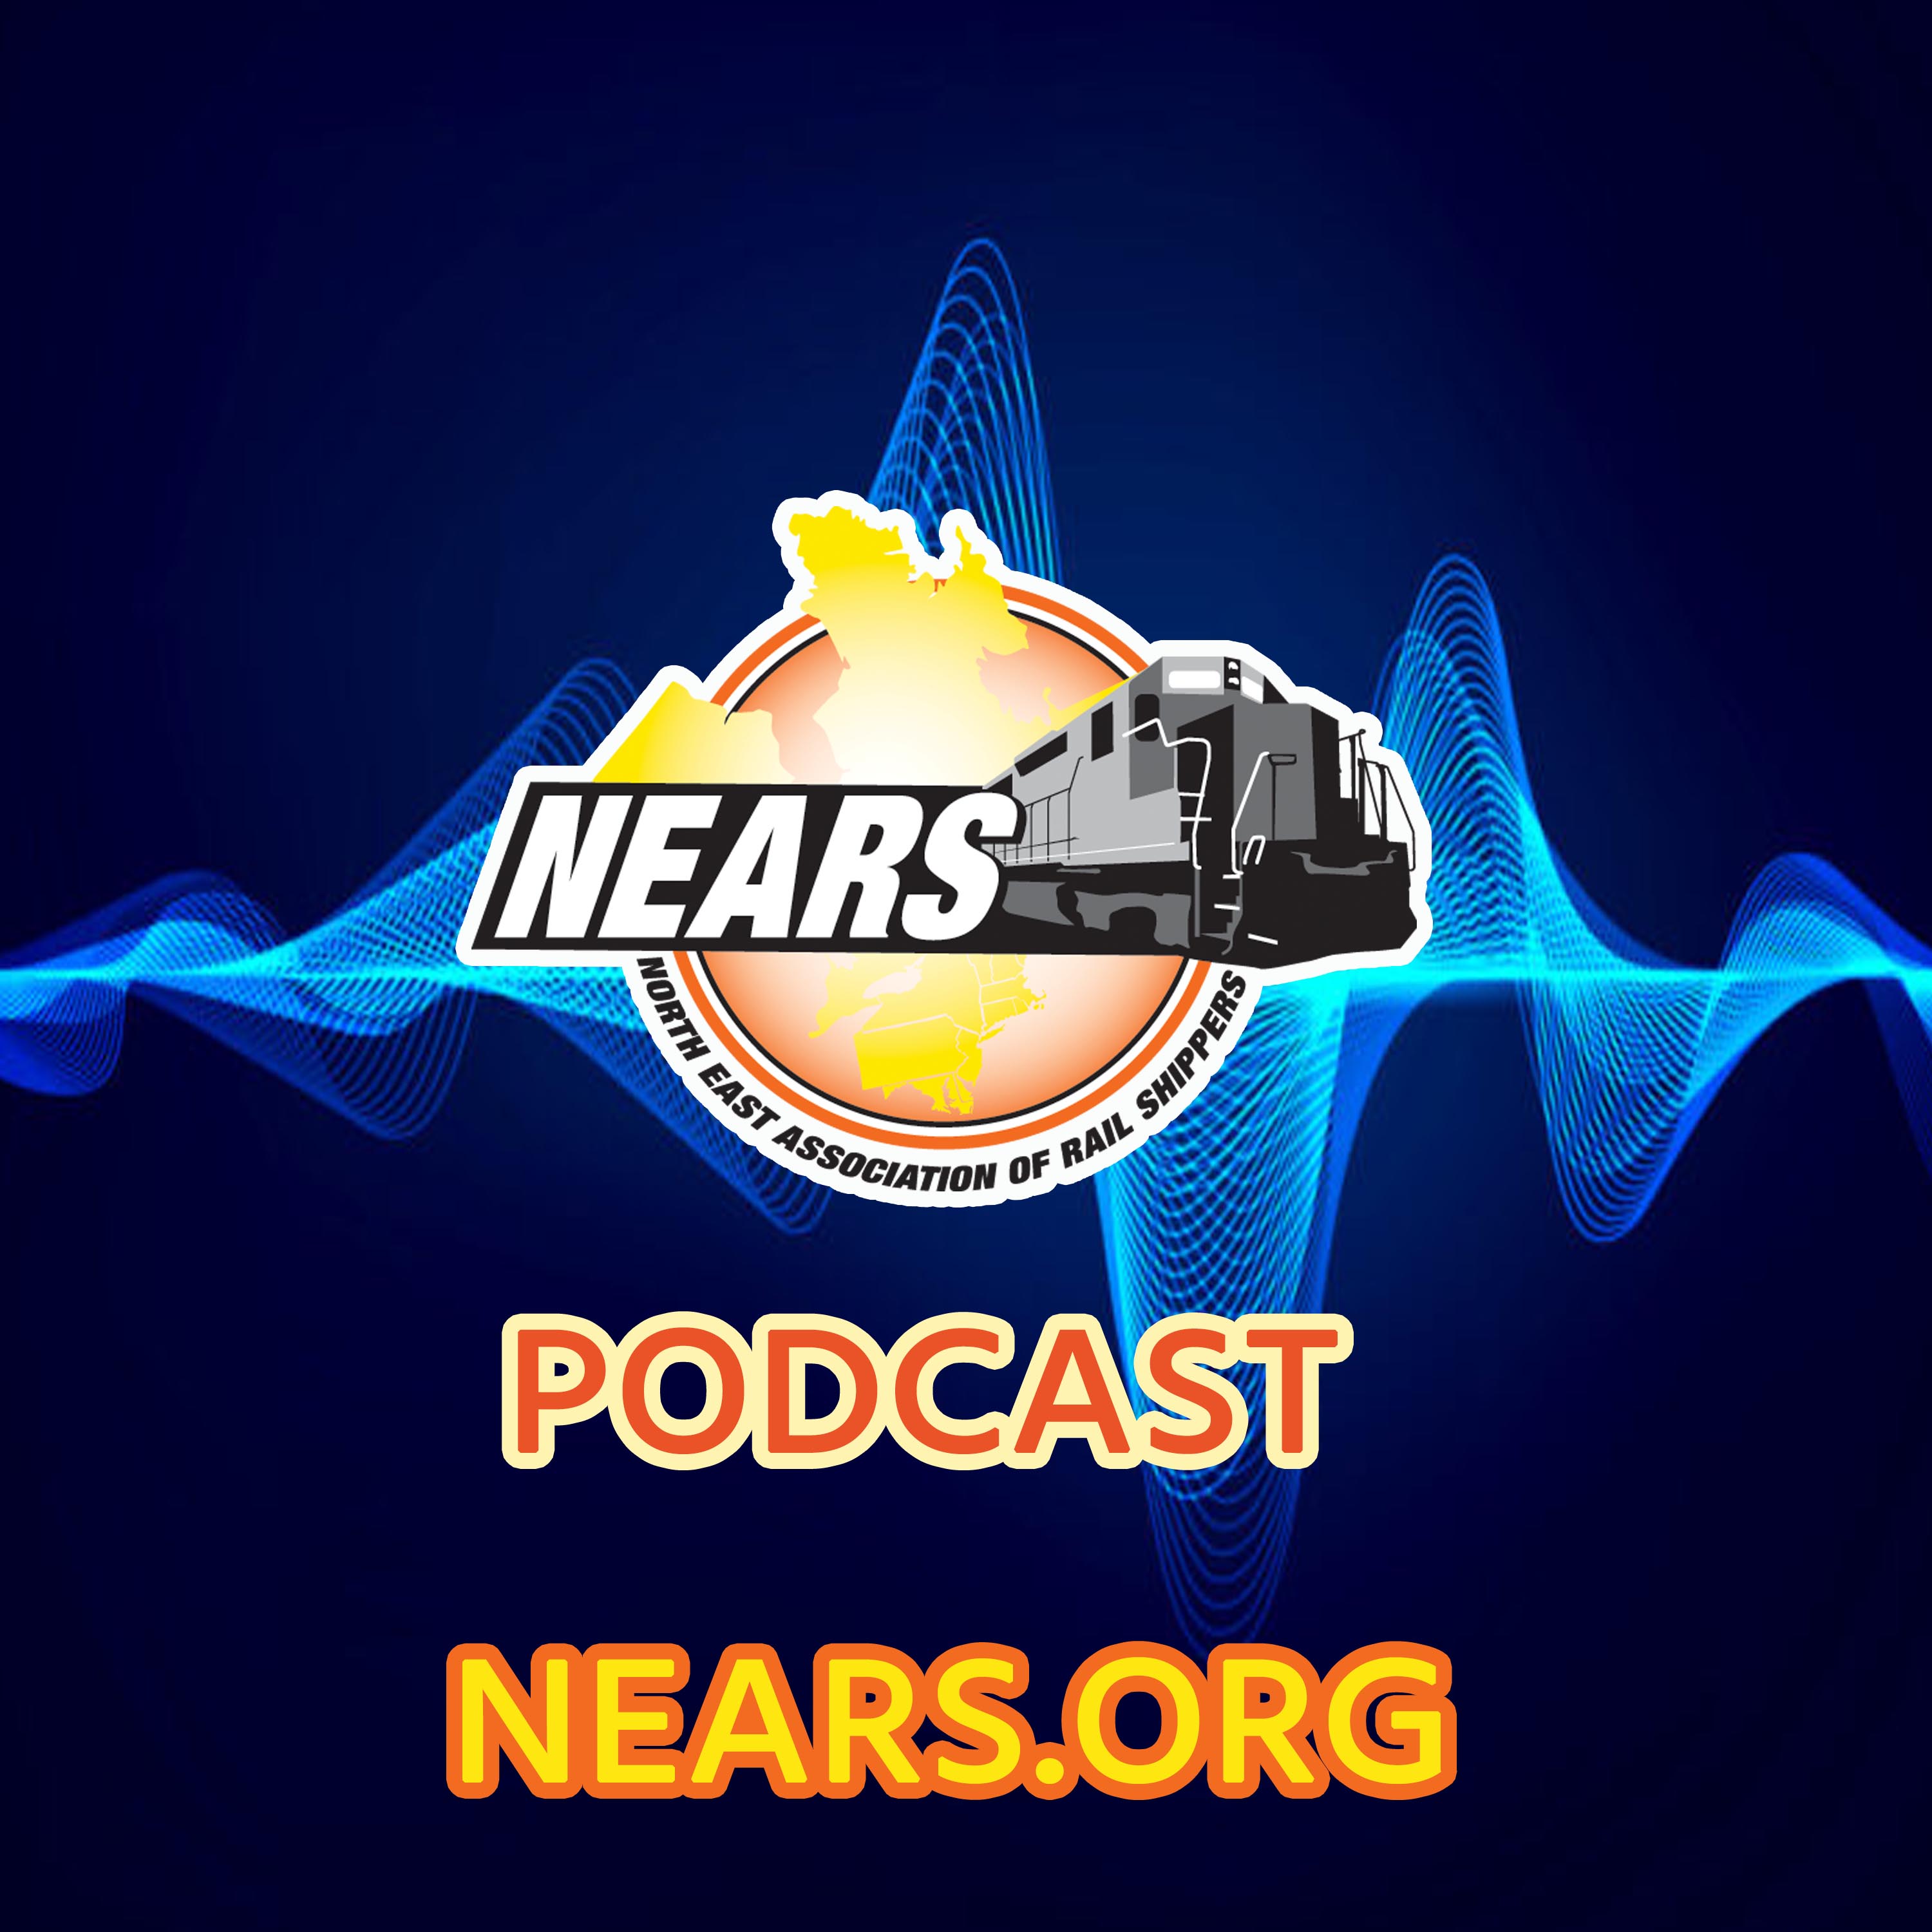 The NEARS.ORG Podcast